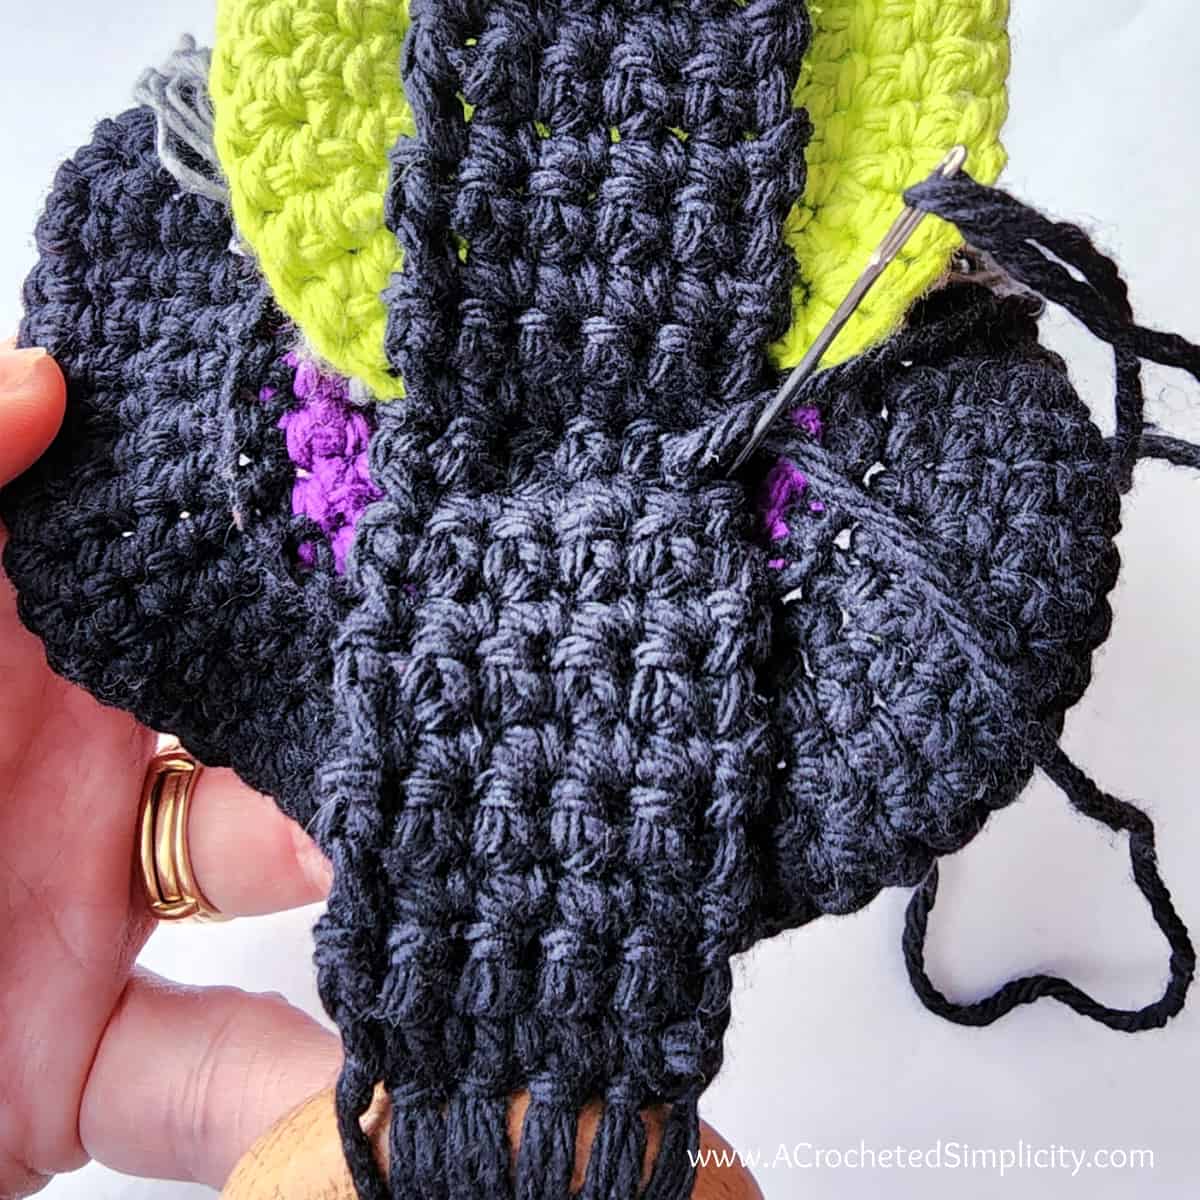 Attach the crochet hanging loop to the back of the witch's head.